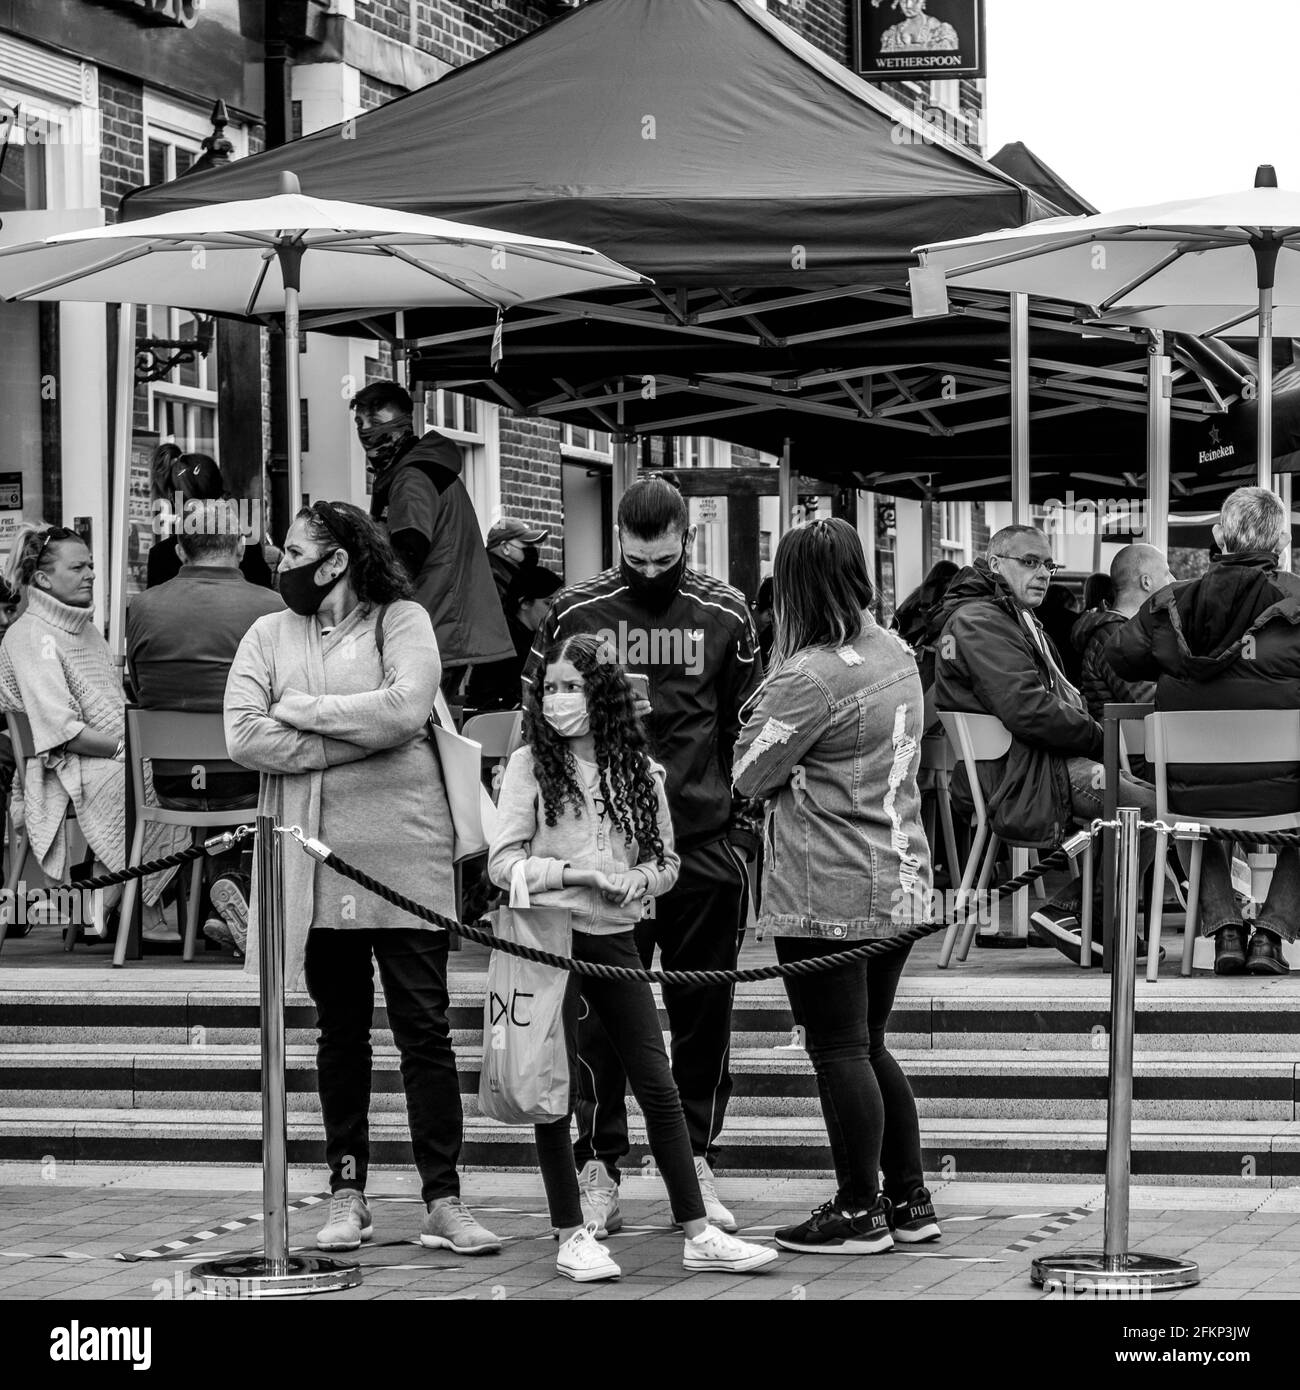 Epsom Surrey London UK, May 02 2021, Group Of People Sitting Ouside A Wetherspoons Pub Drinking On A Terrace Stock Photo